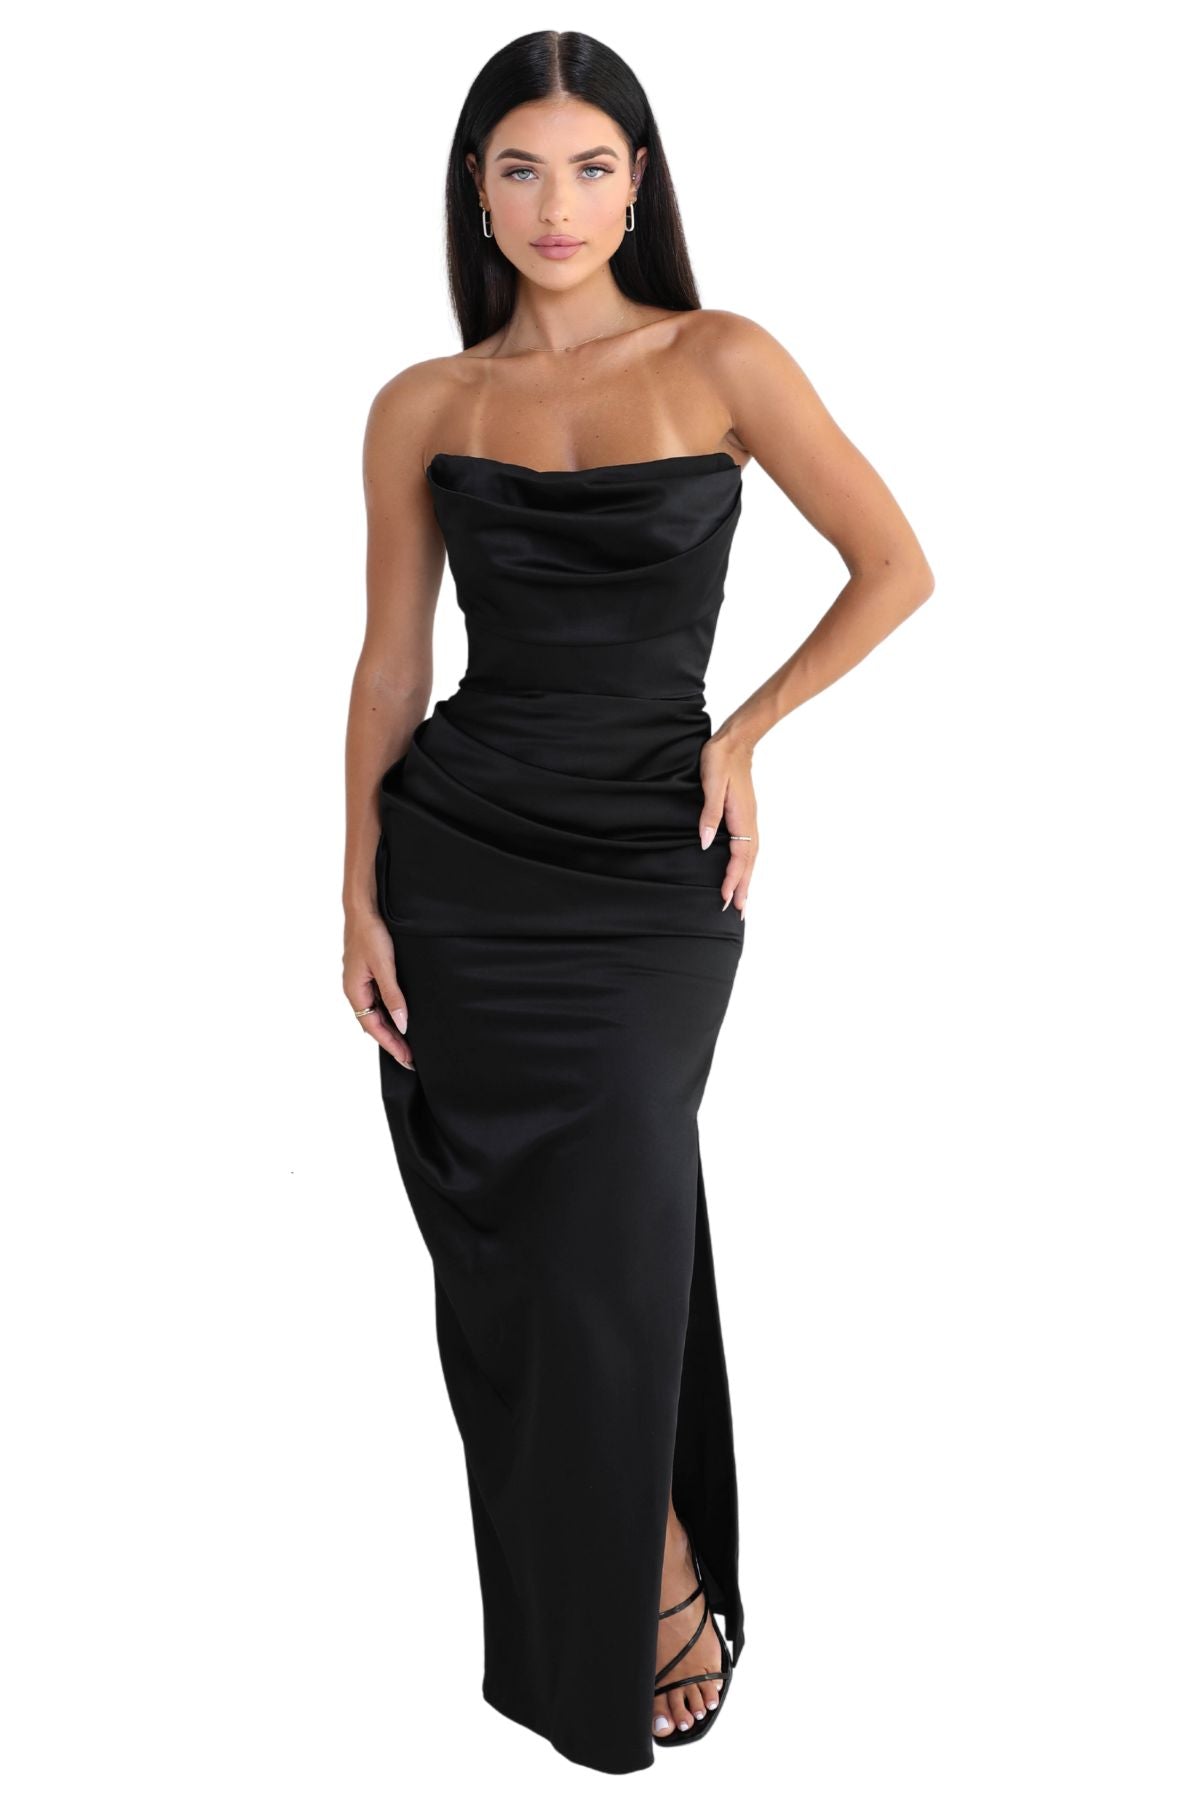 Black Sequin Strapless Sheer Mermaid Made-to-Order Prom Dress